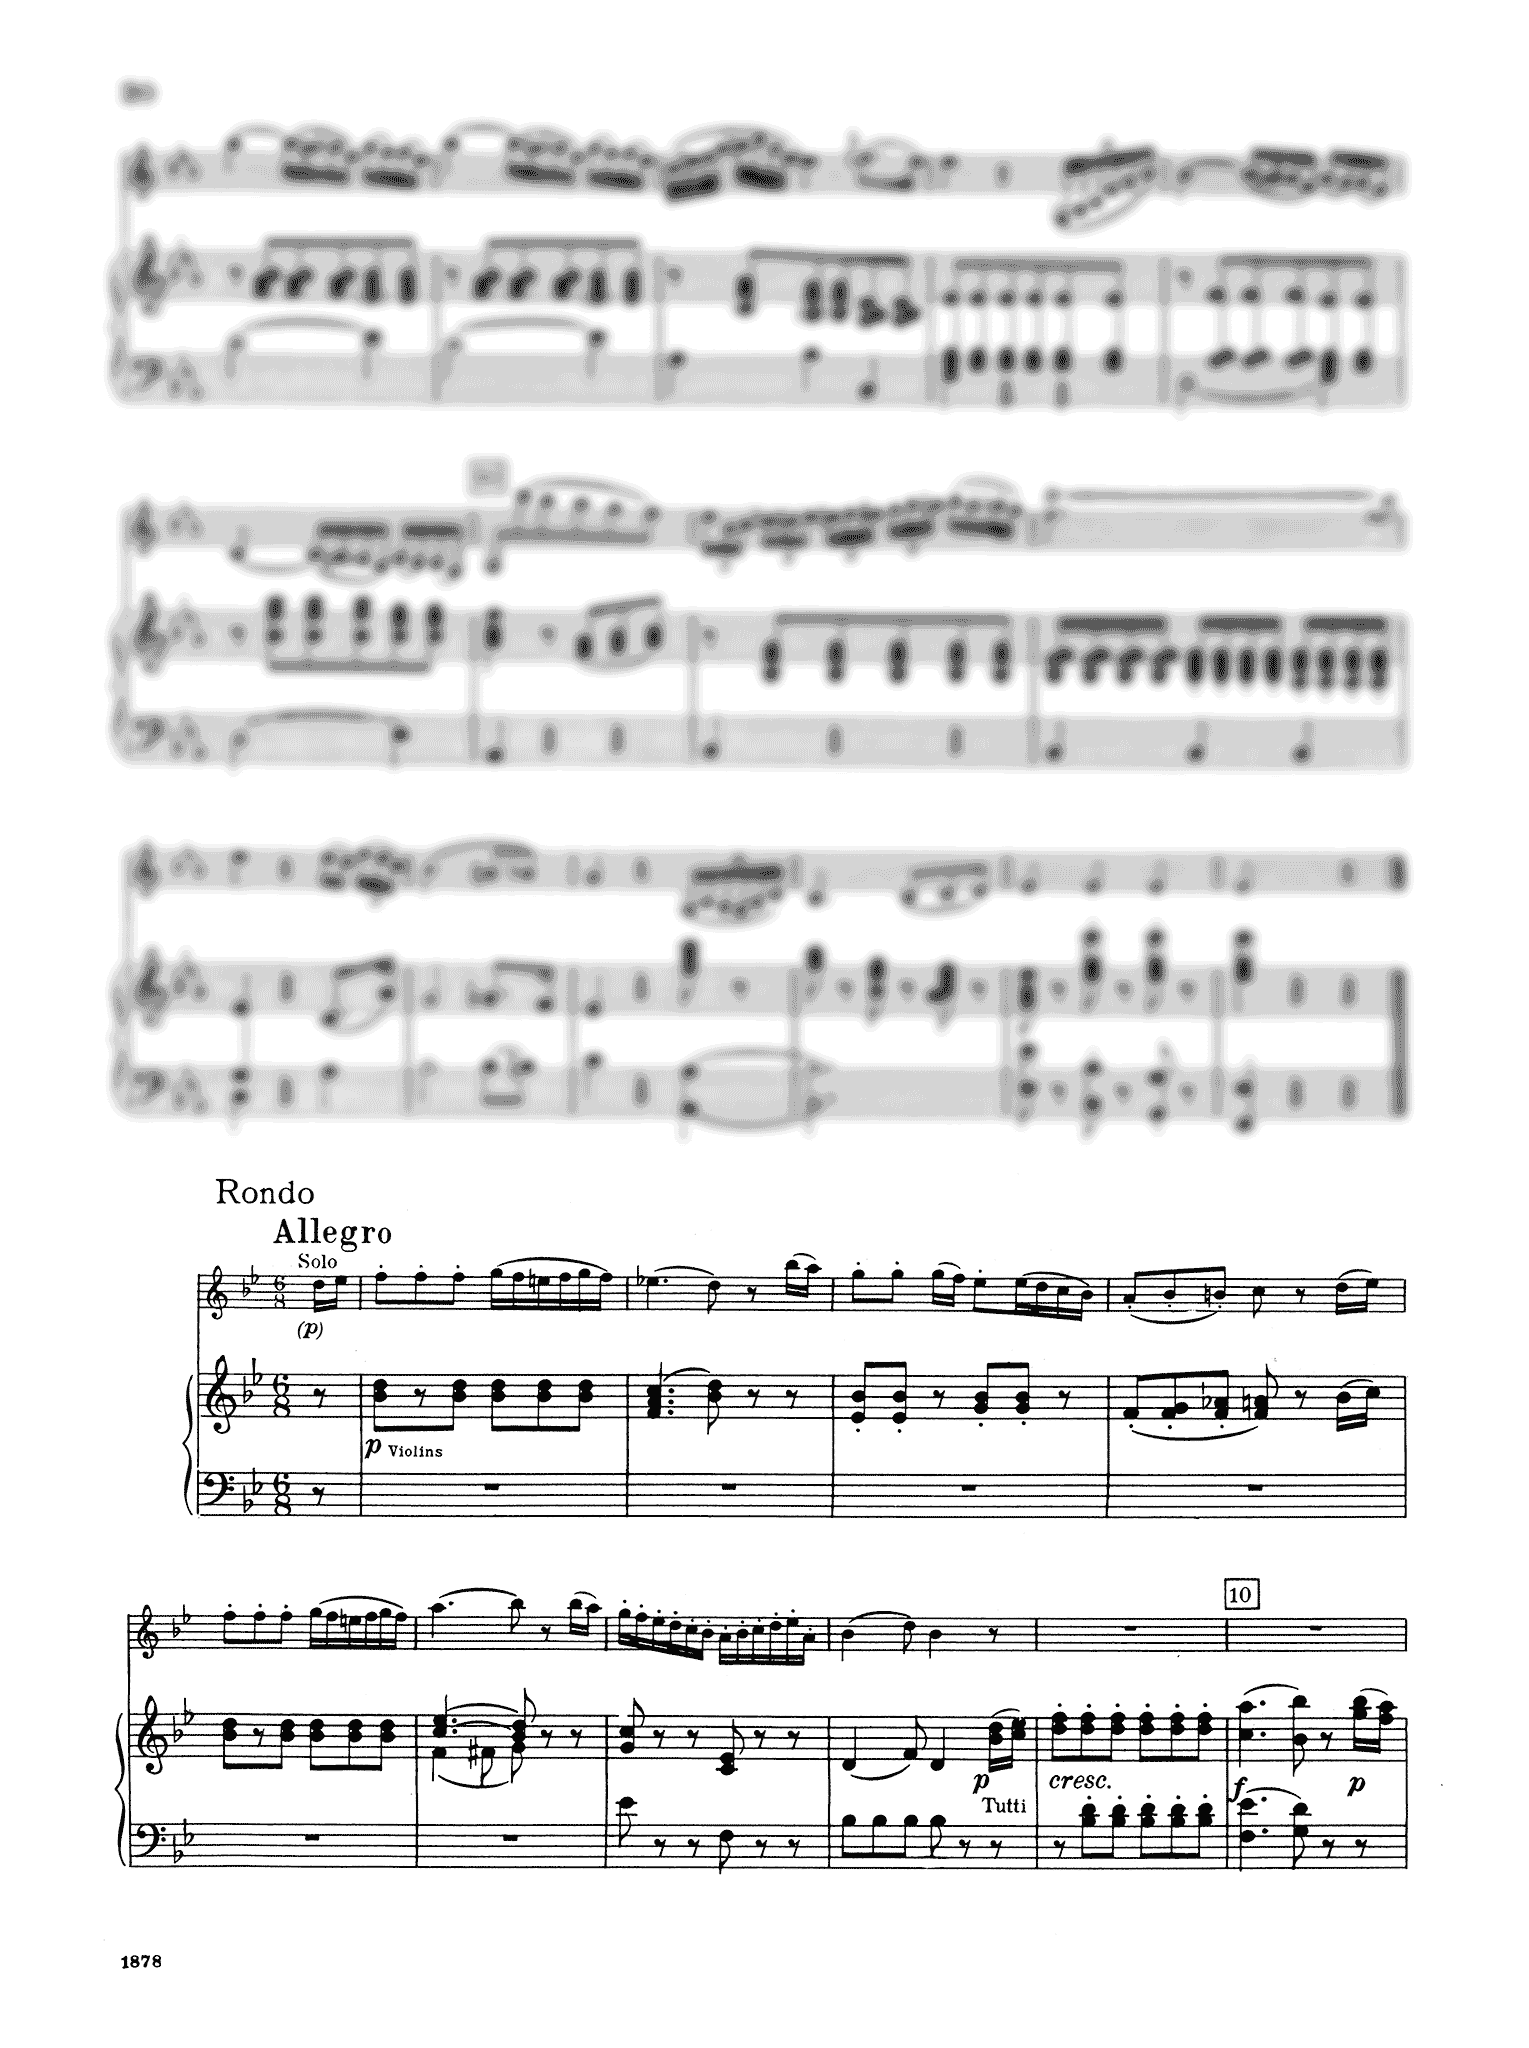 Clarinet Concerto in A Major, K. 622 (B-flat version) - Movement 3